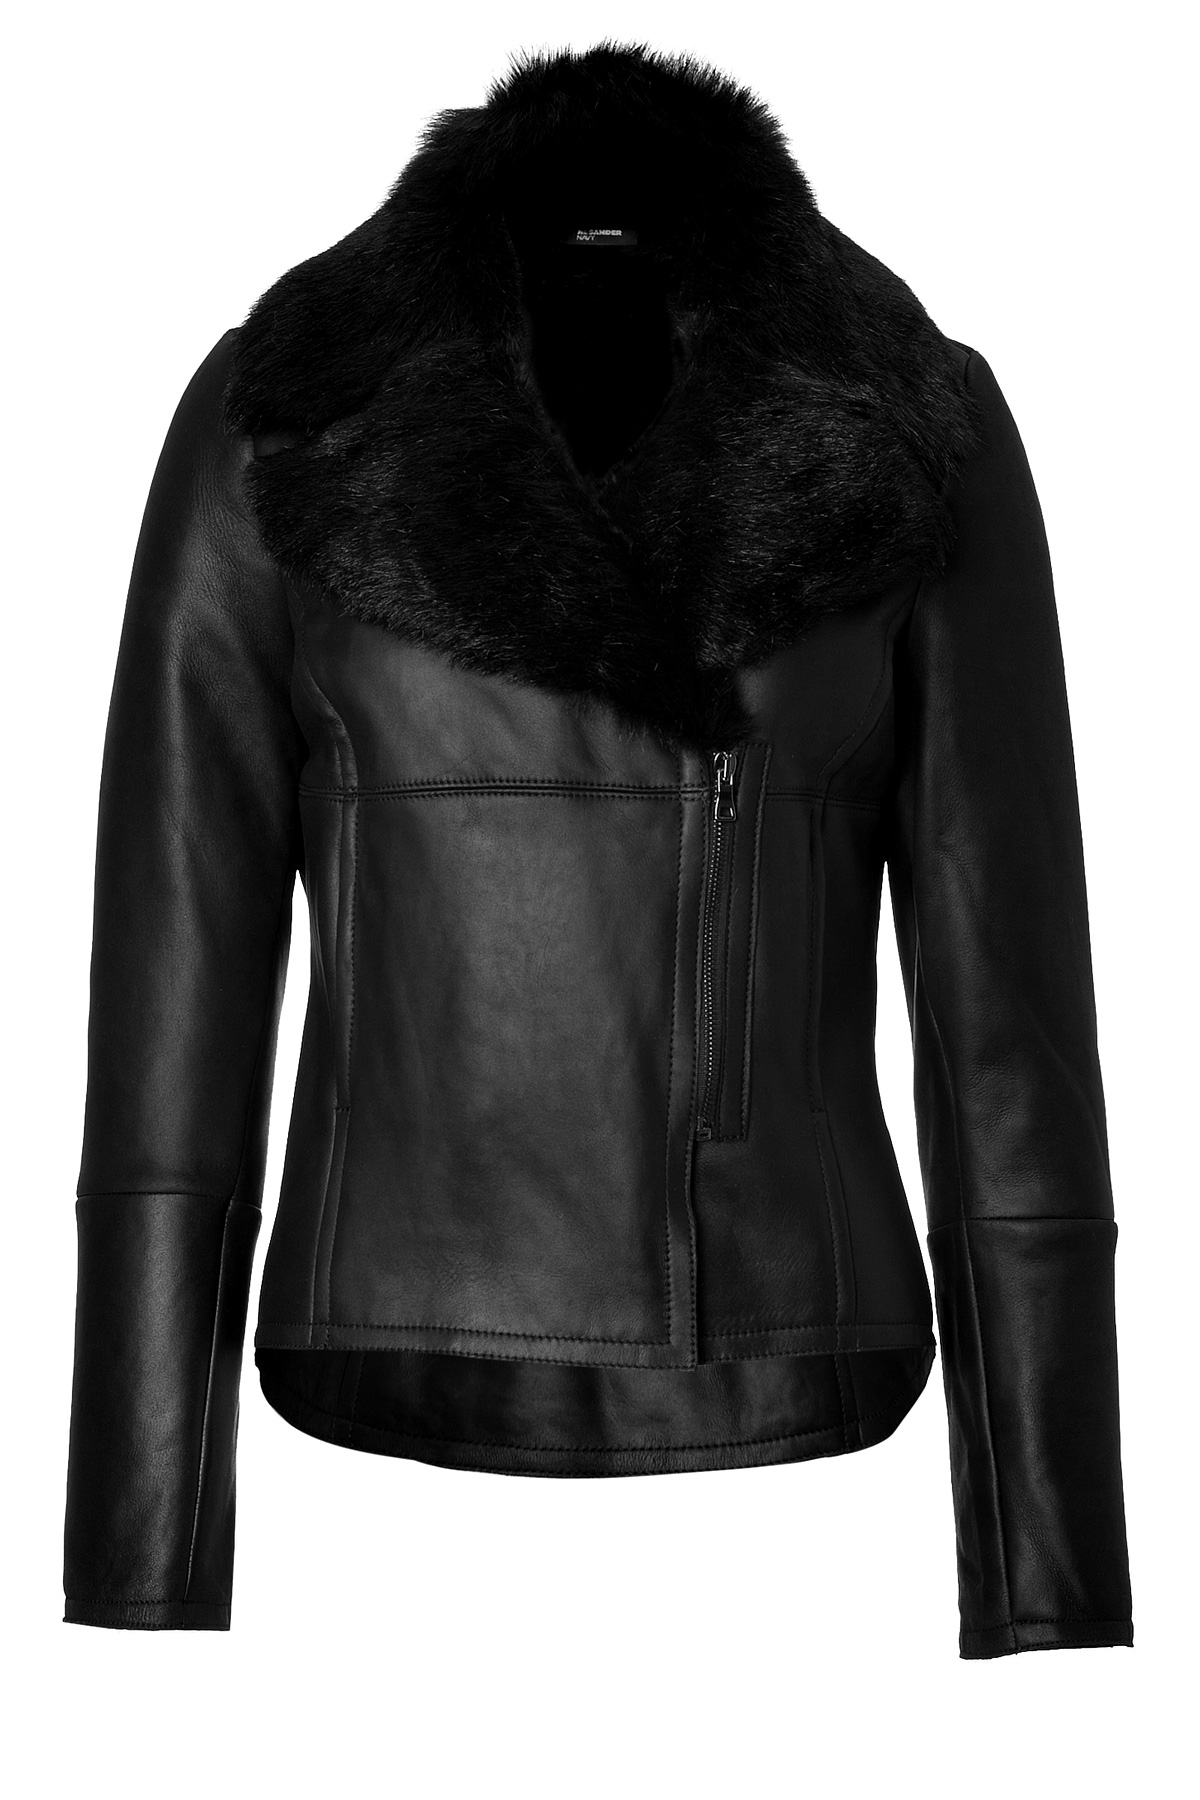 Jil sander navy Leather Jacket With Fur Collar in Black | Lyst